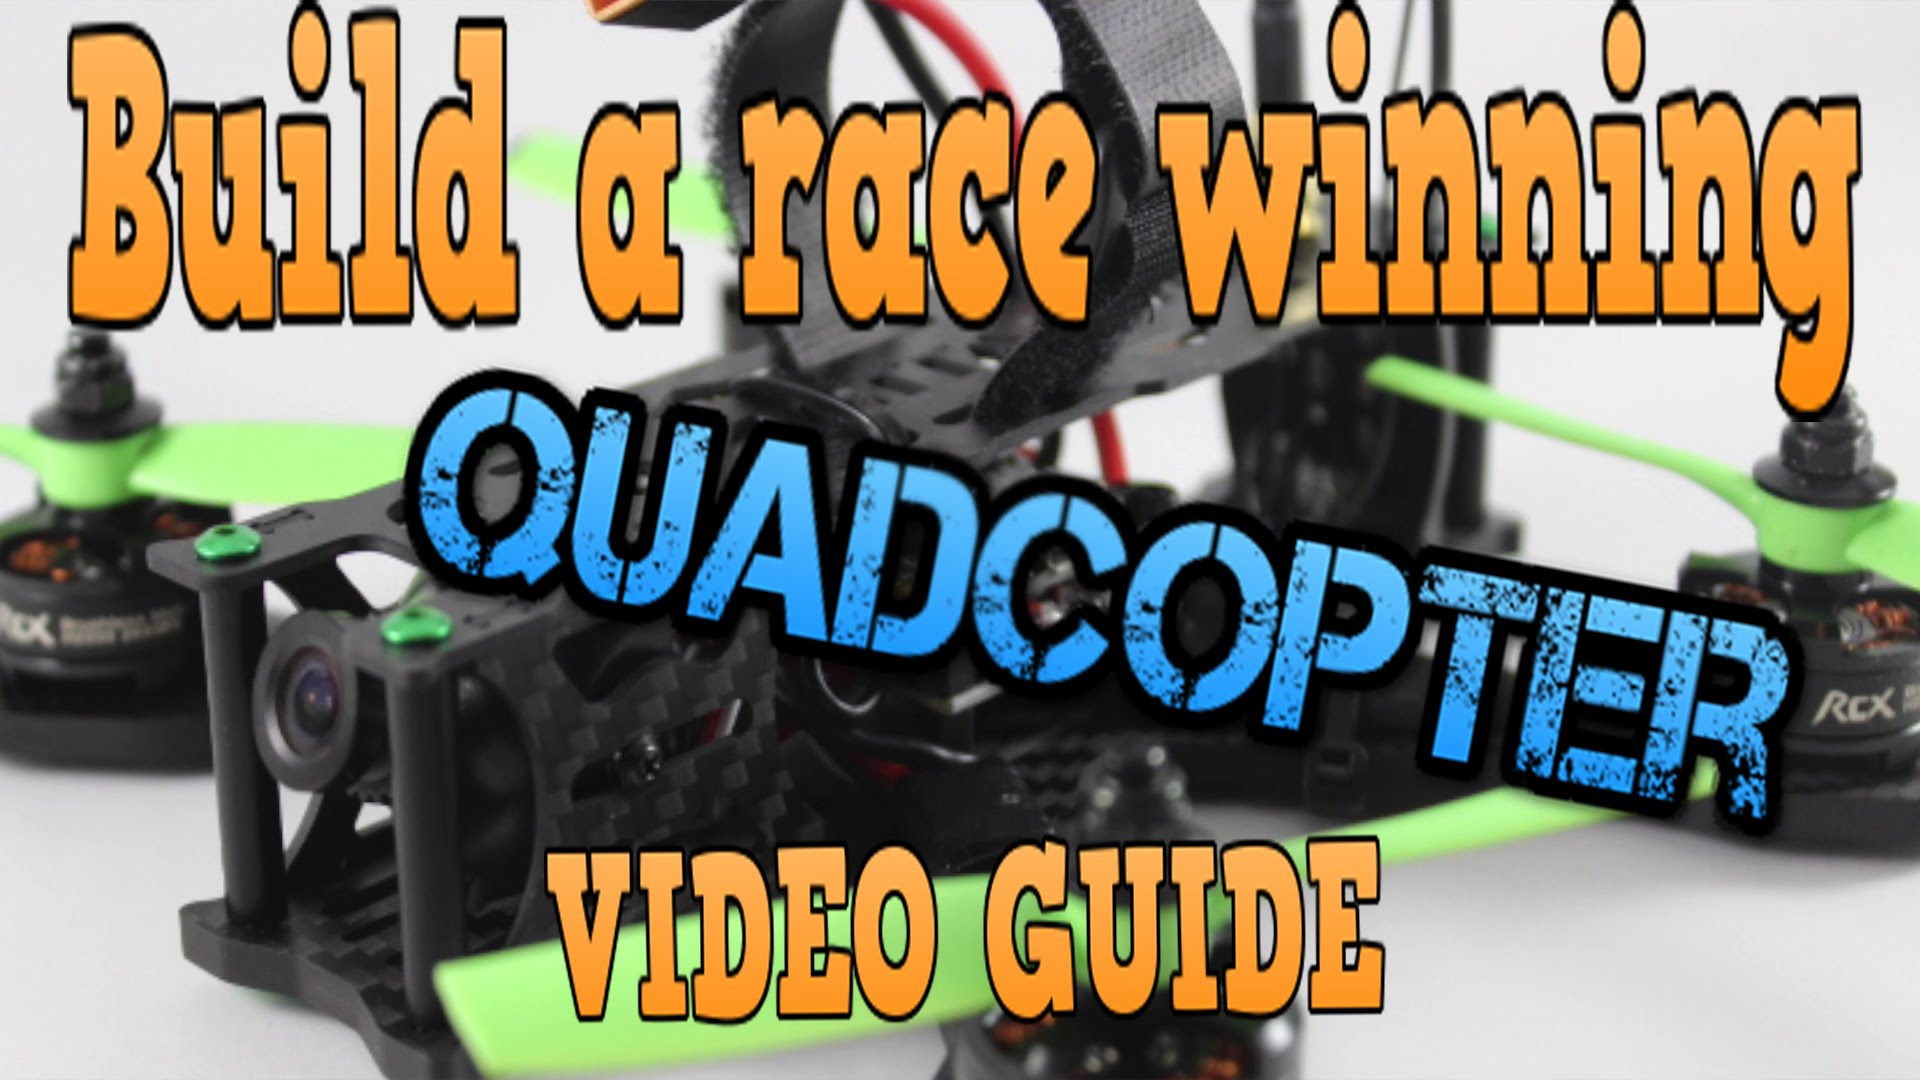 HOW TO BUILD A RACE WINNING FPV QUADCOPTER: TUTORIAL GUIDE